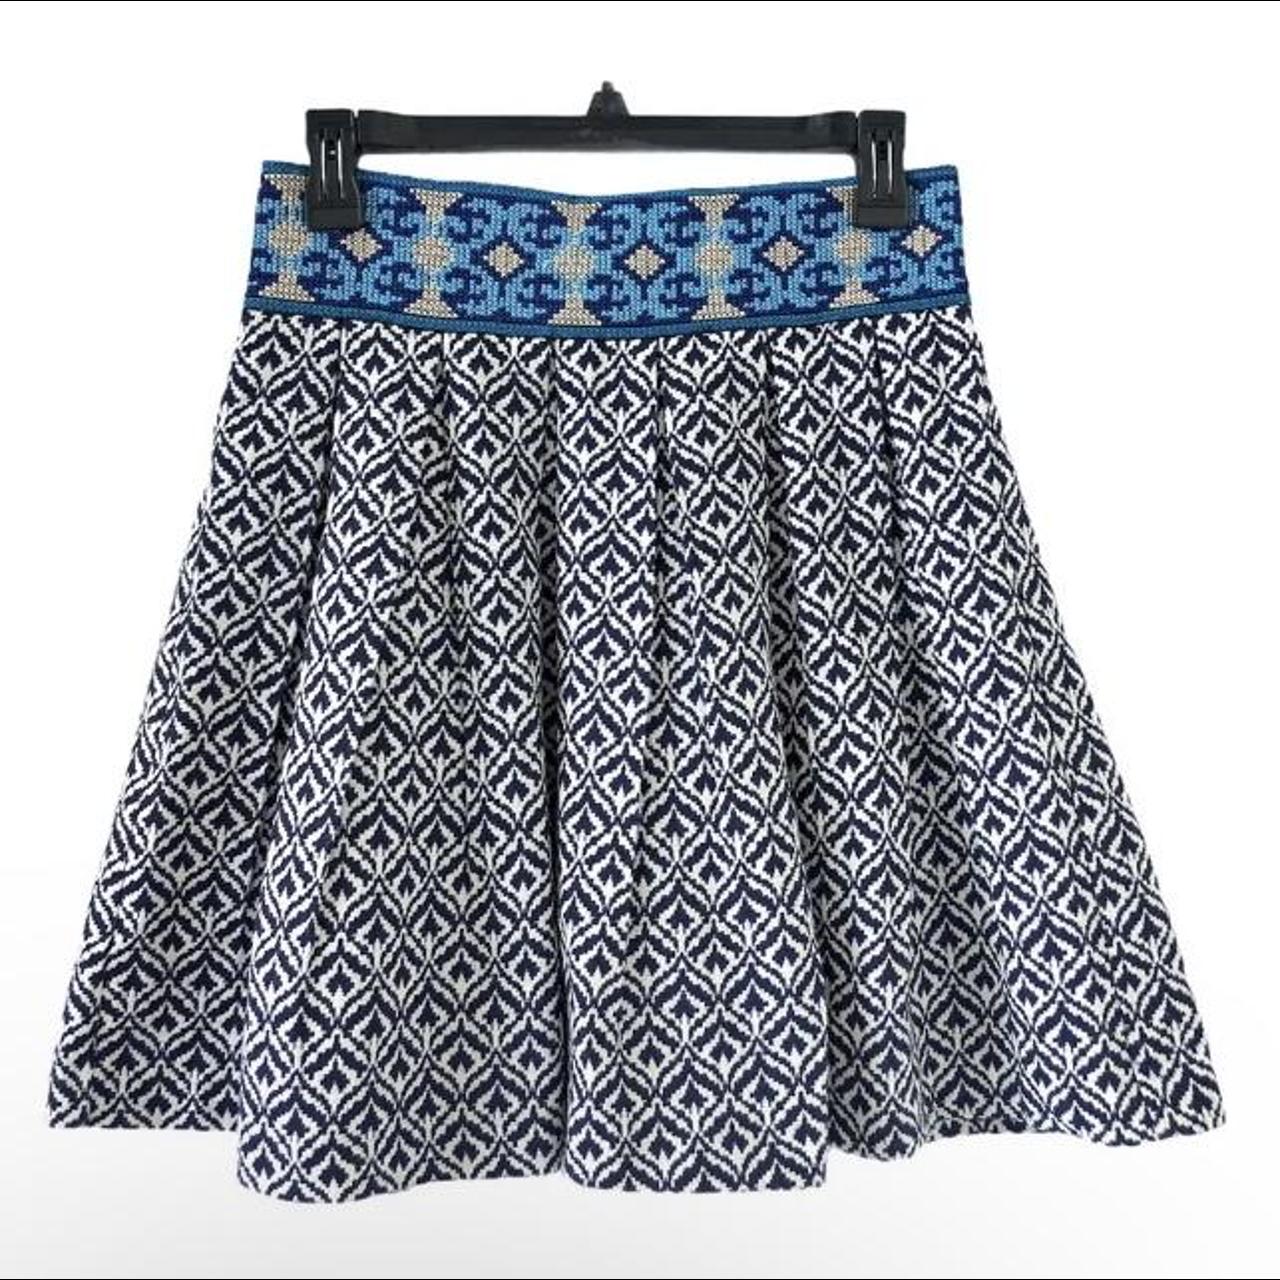 Product Image 1 - Sister Jane Skirt Size M.

A-line